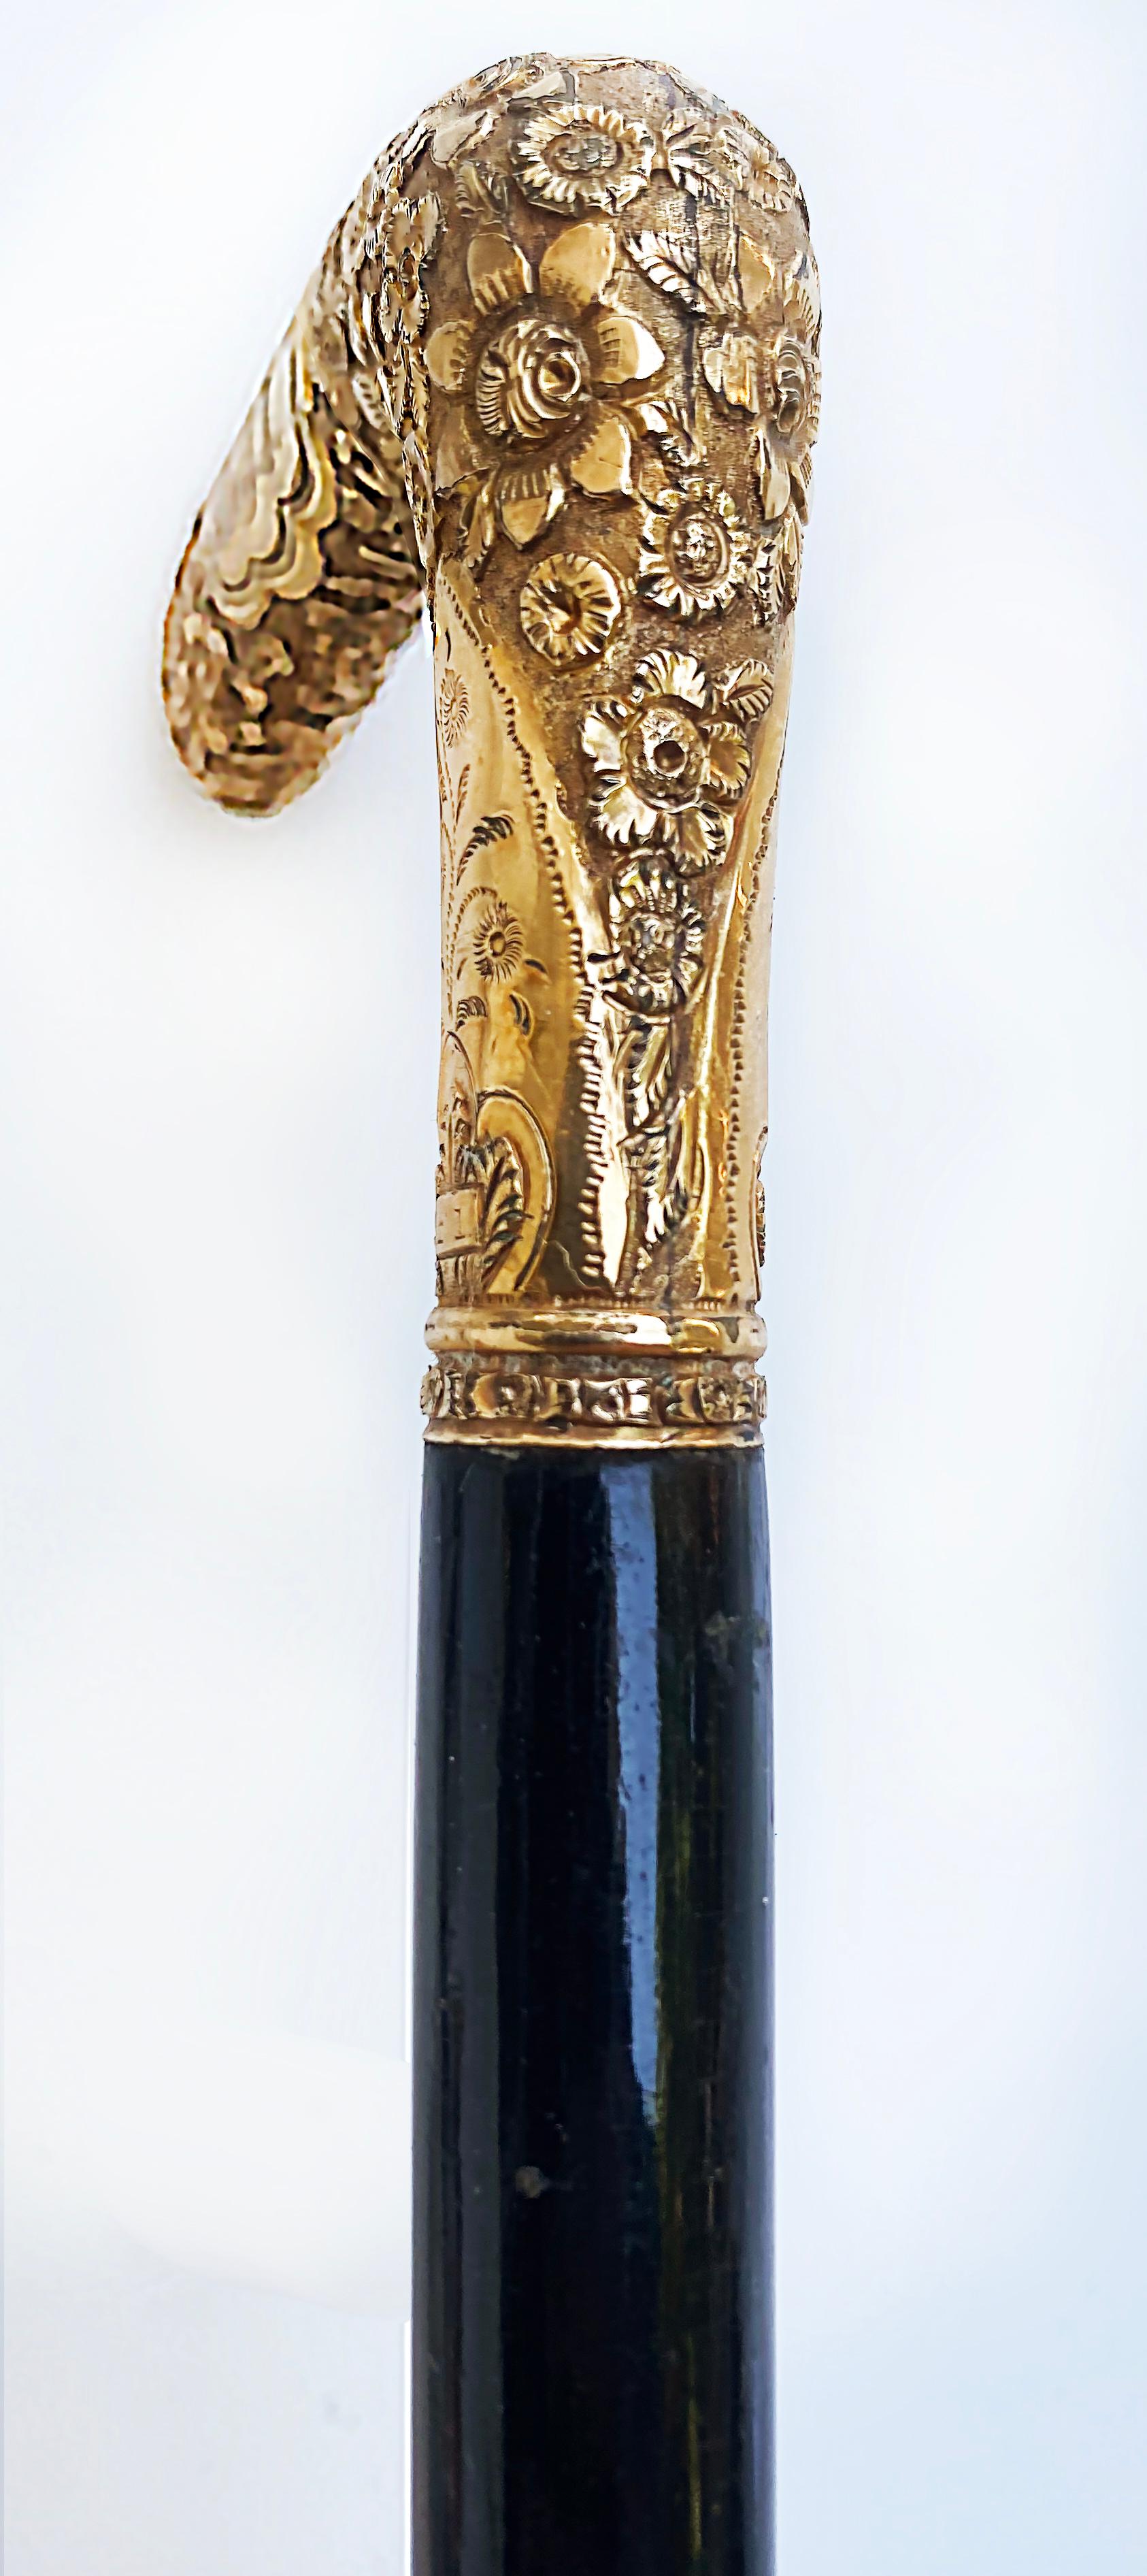 Antique Gold Floral Repousse Monogrammed Walking Stick 

Offered for sale is an antique gold-handled walking stick with a floral repousse design. The handle has an engraved monogram and is supported by an ebonized wood stick. The end has a brass